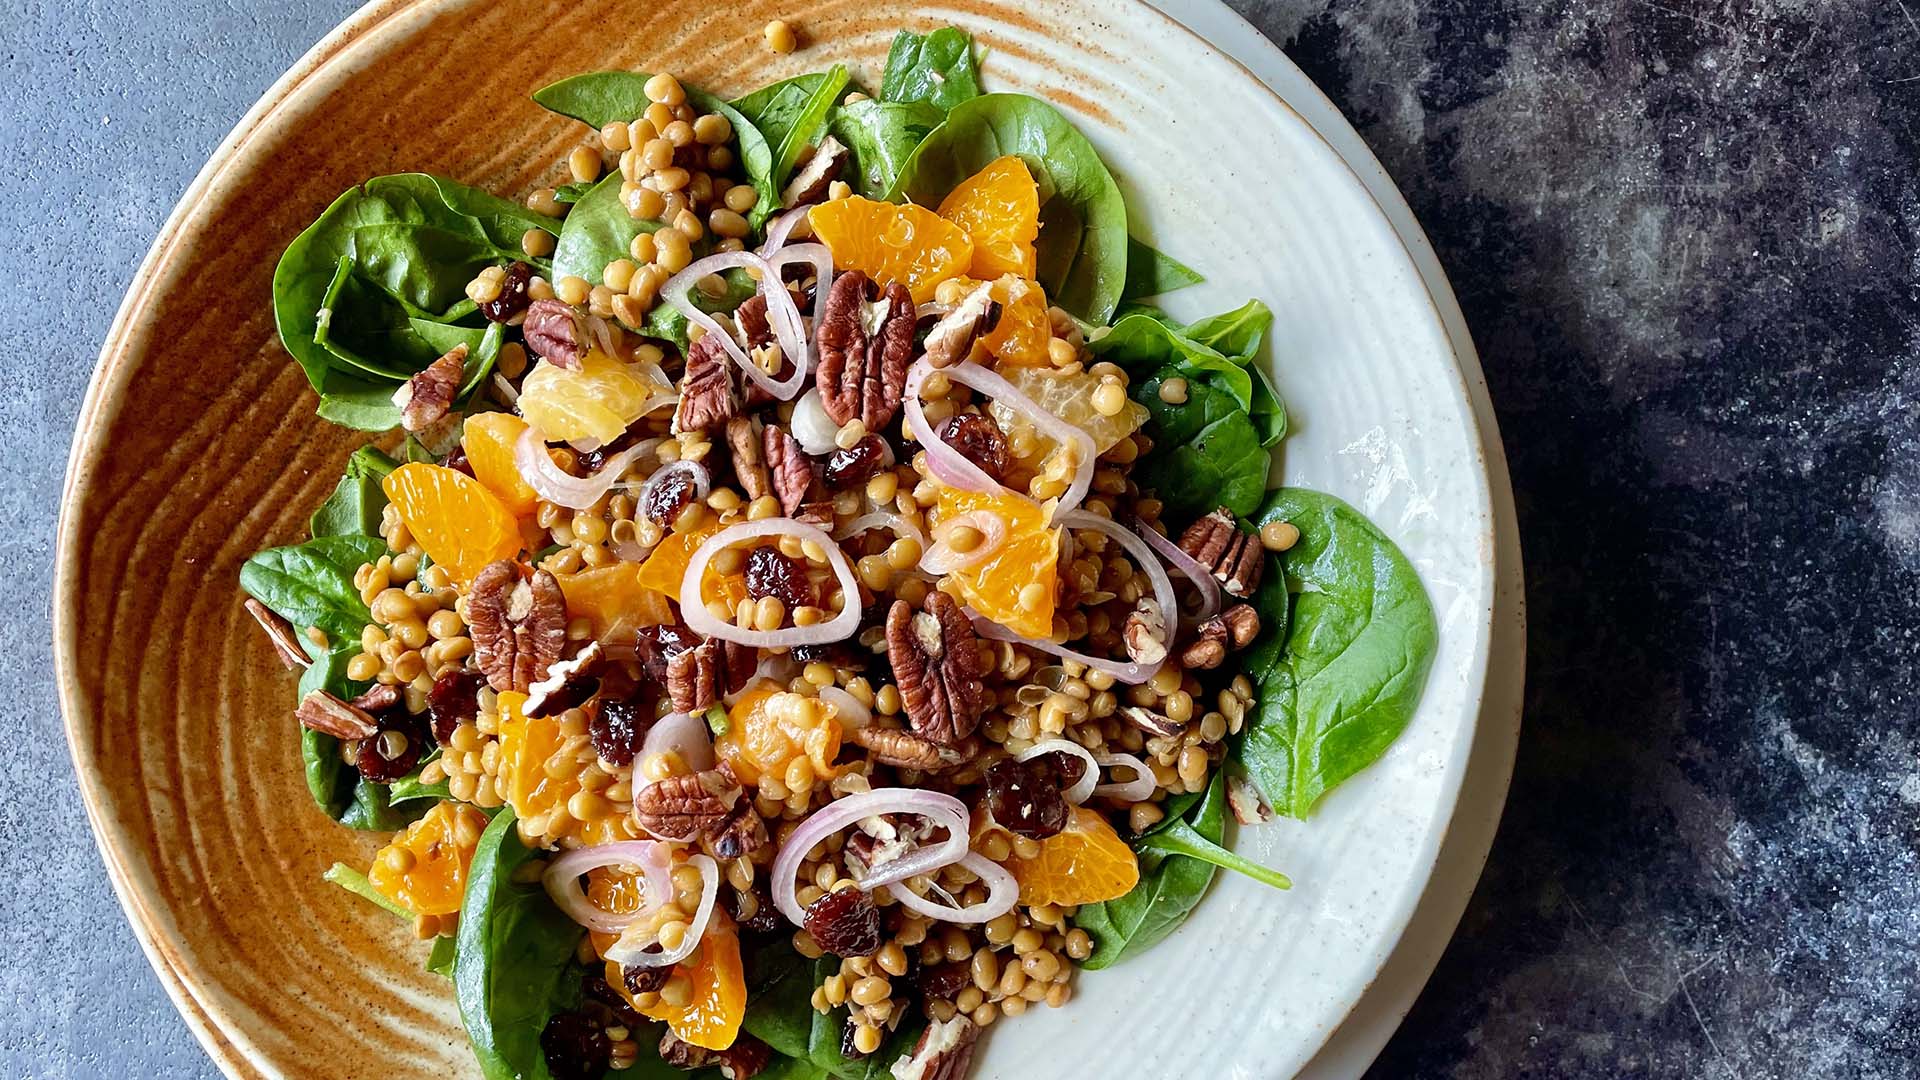 Spinach and lentil salad with clementines and pecans